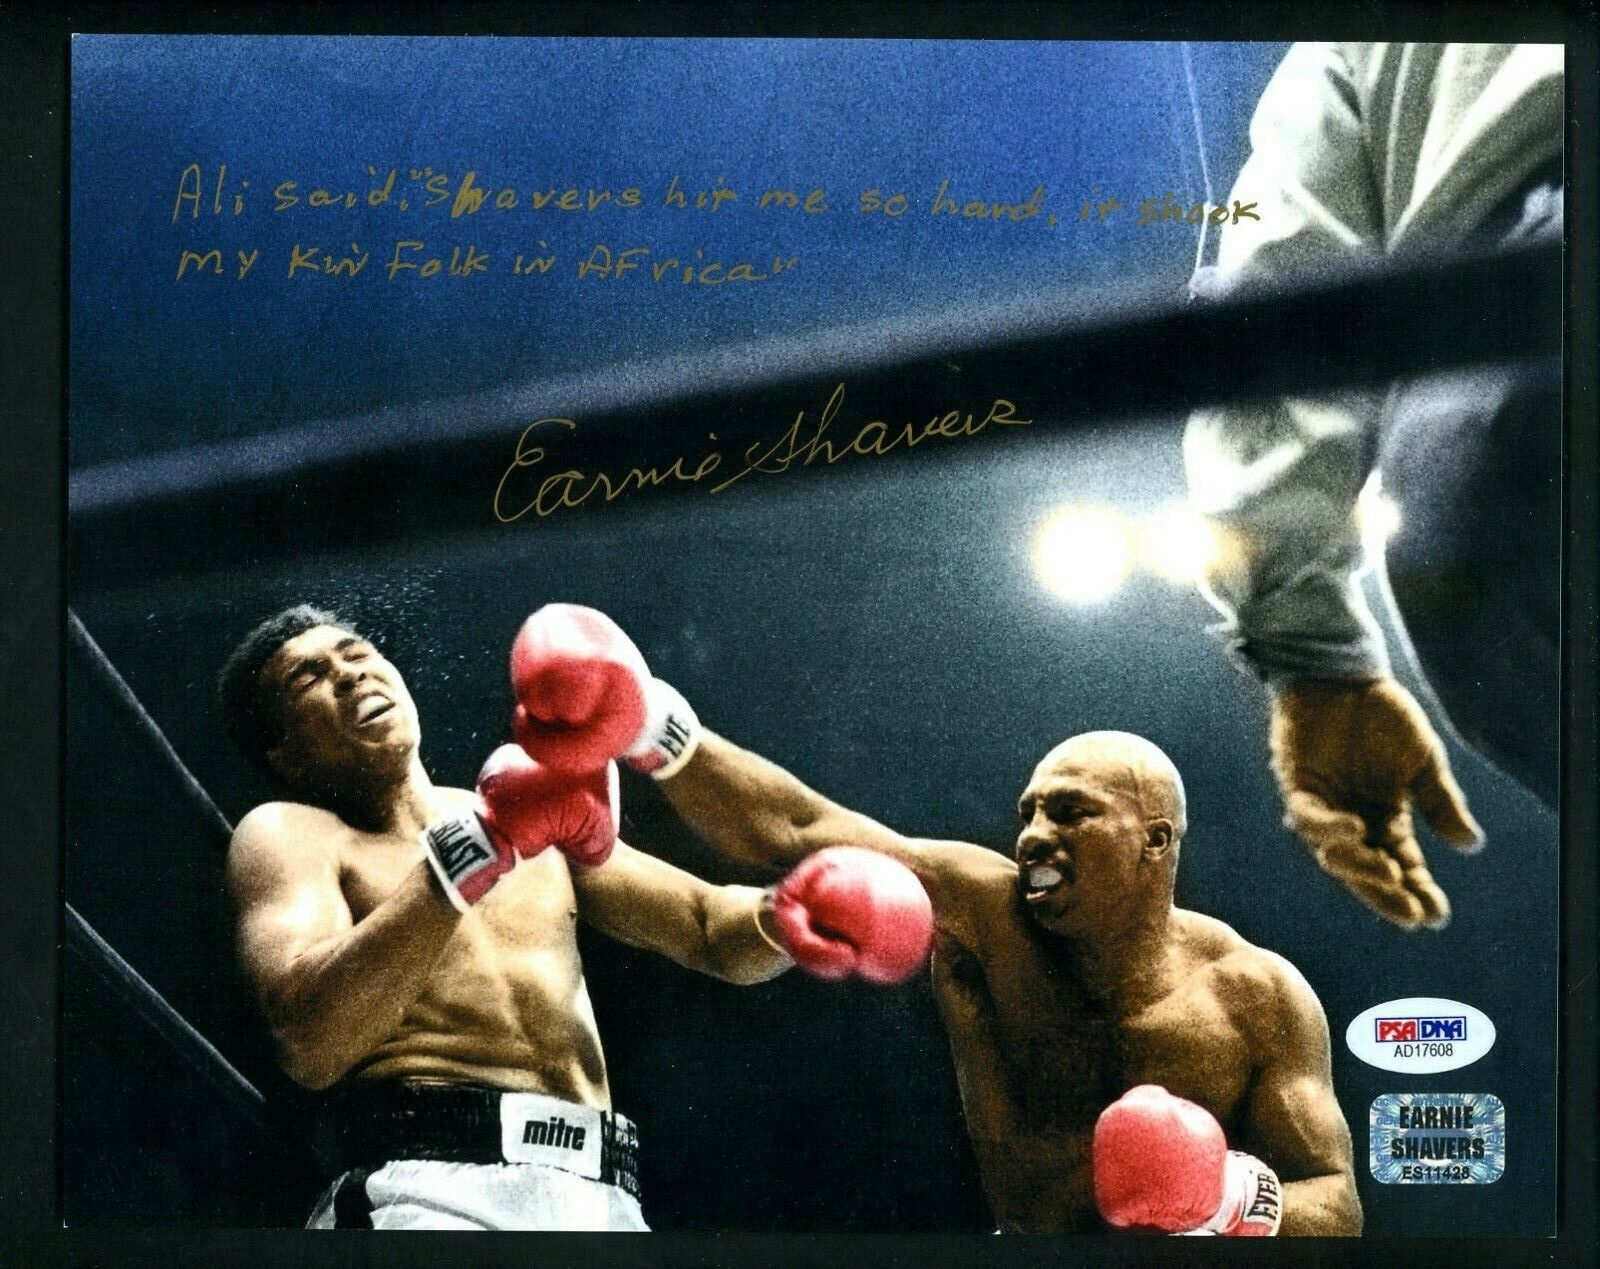 Ernie Shavers vs Muhammad Ali PSA/DNA Signed 8 x 10 Photo Poster painting with inscription